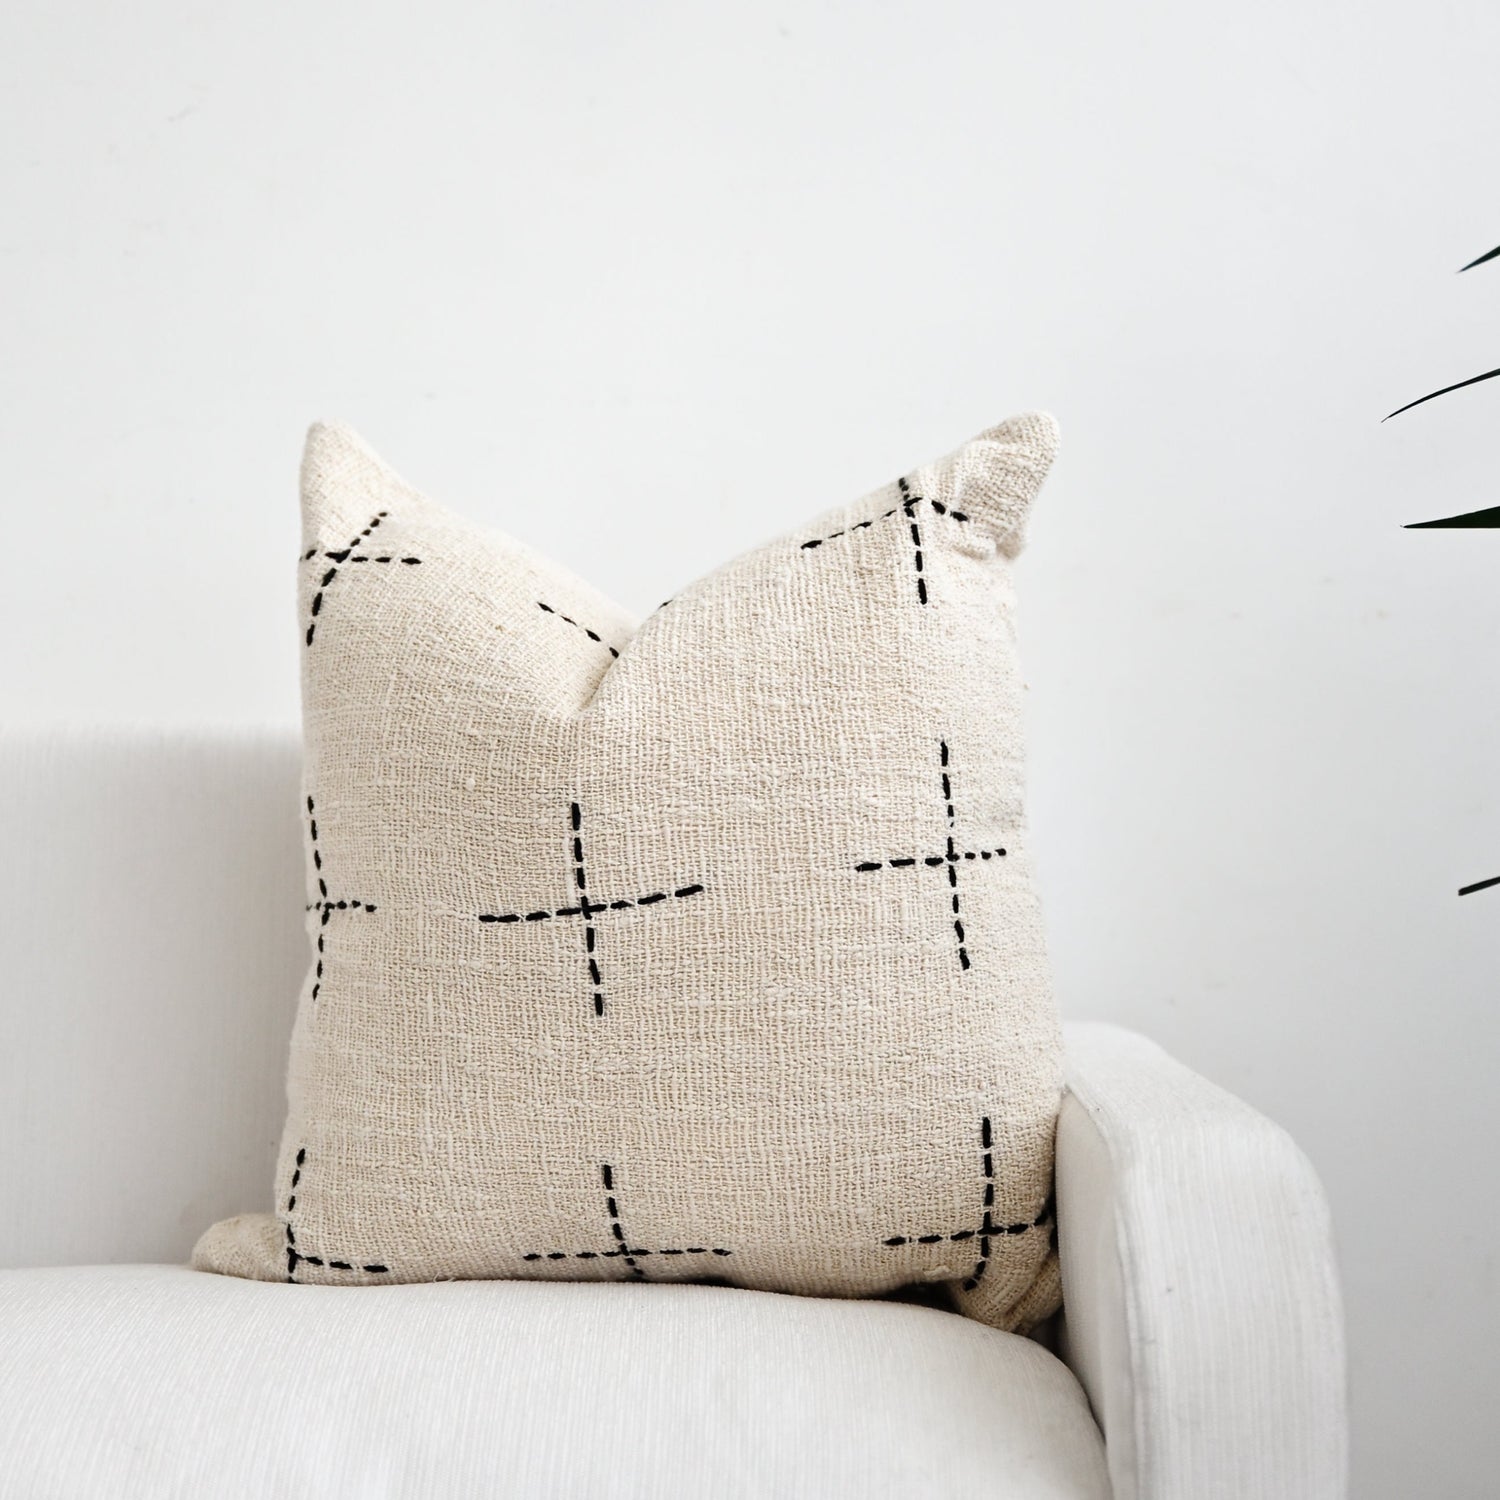 Lalabella Cushion Cover with Stitched Cross - 55cm x 55cm